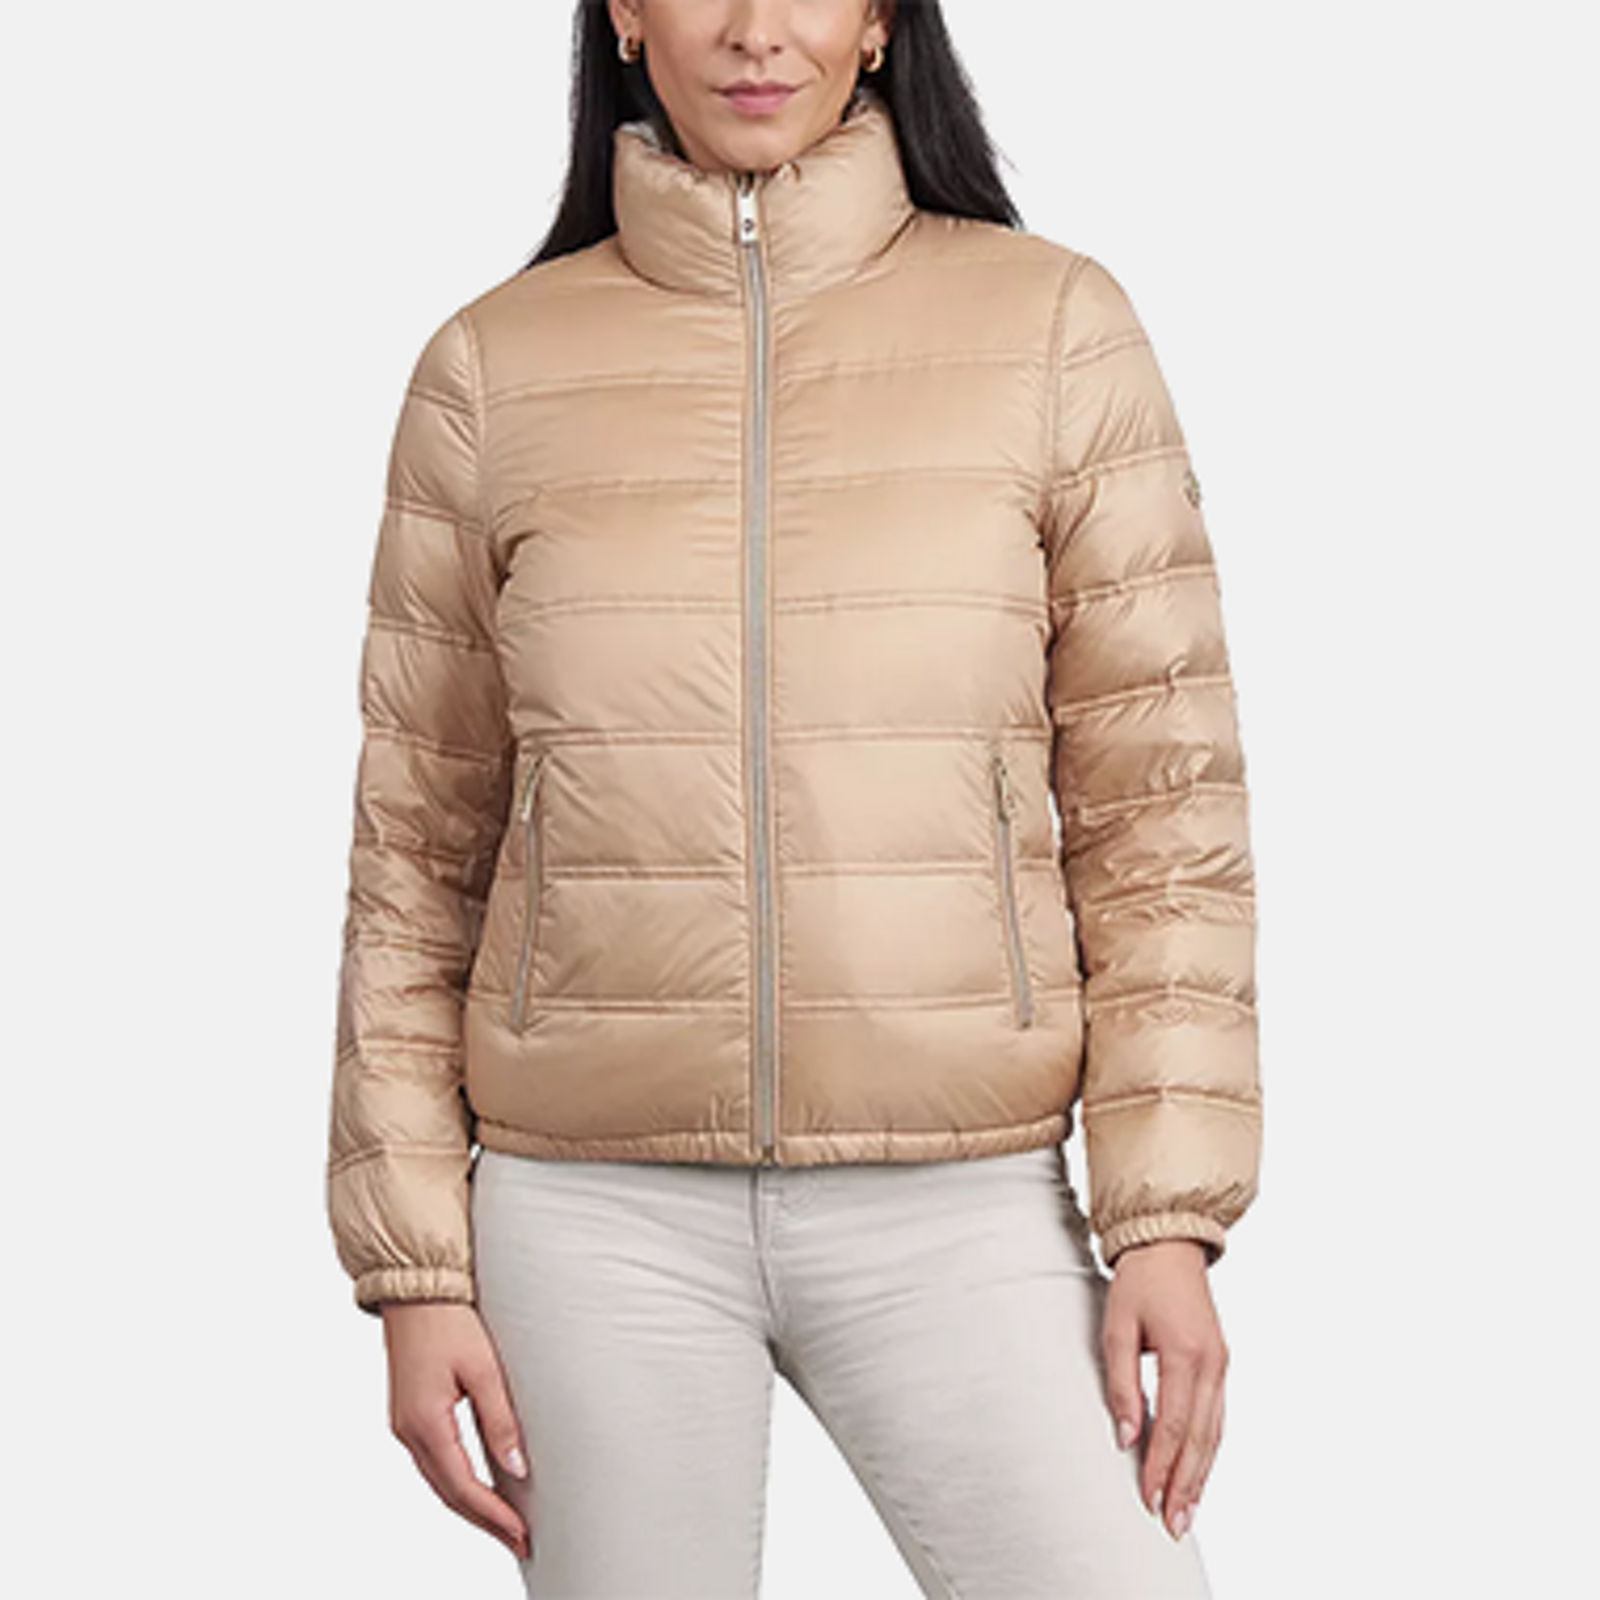 Columbia Jackets and Coats for Women - Macy's